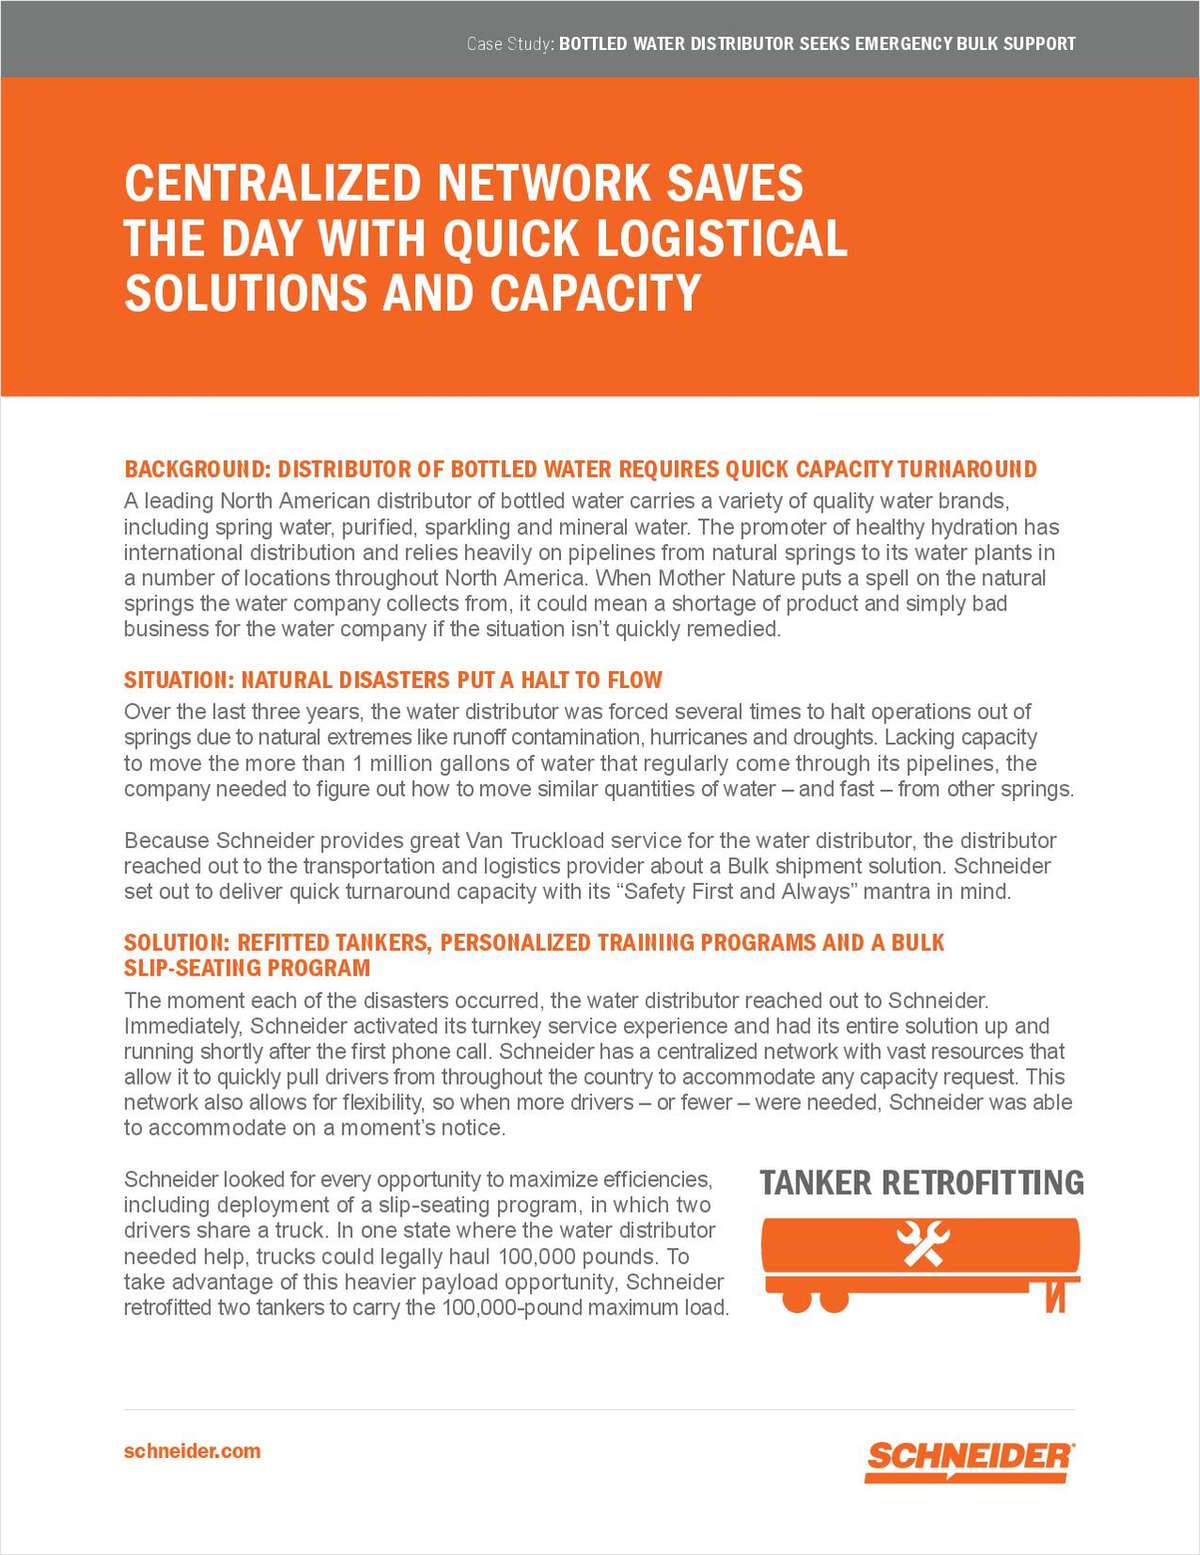 Centralized Network Saves the Day with Quick Logistical Solutions and Capacity